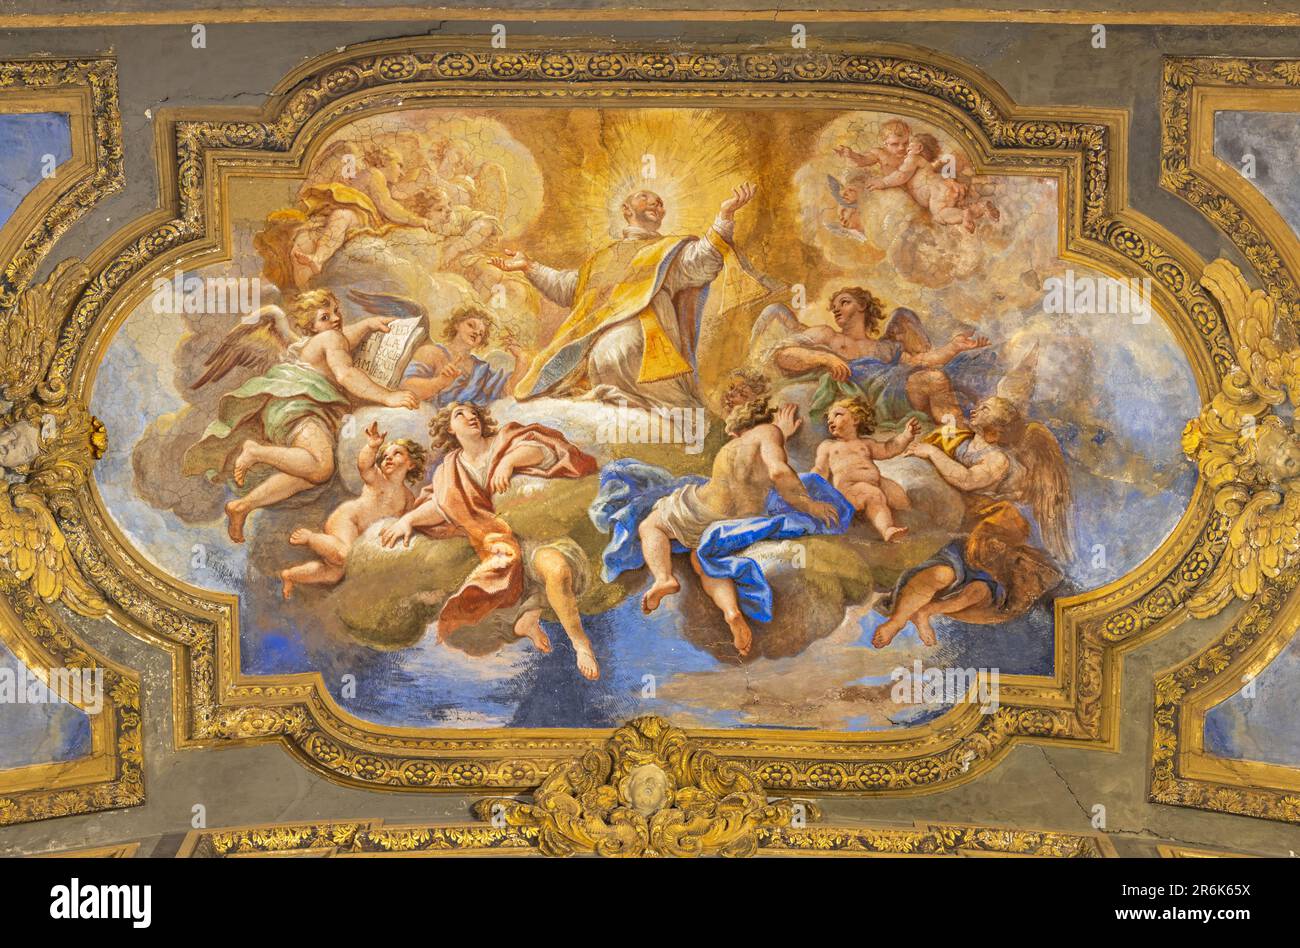 NAPLES, ITALY - APRIL 20, 2023: The ceiling fresco of St. Ignace in the church Chiesa di San Ferdinando by Paolo De Matteis (1695 - 1698). Stock Photo